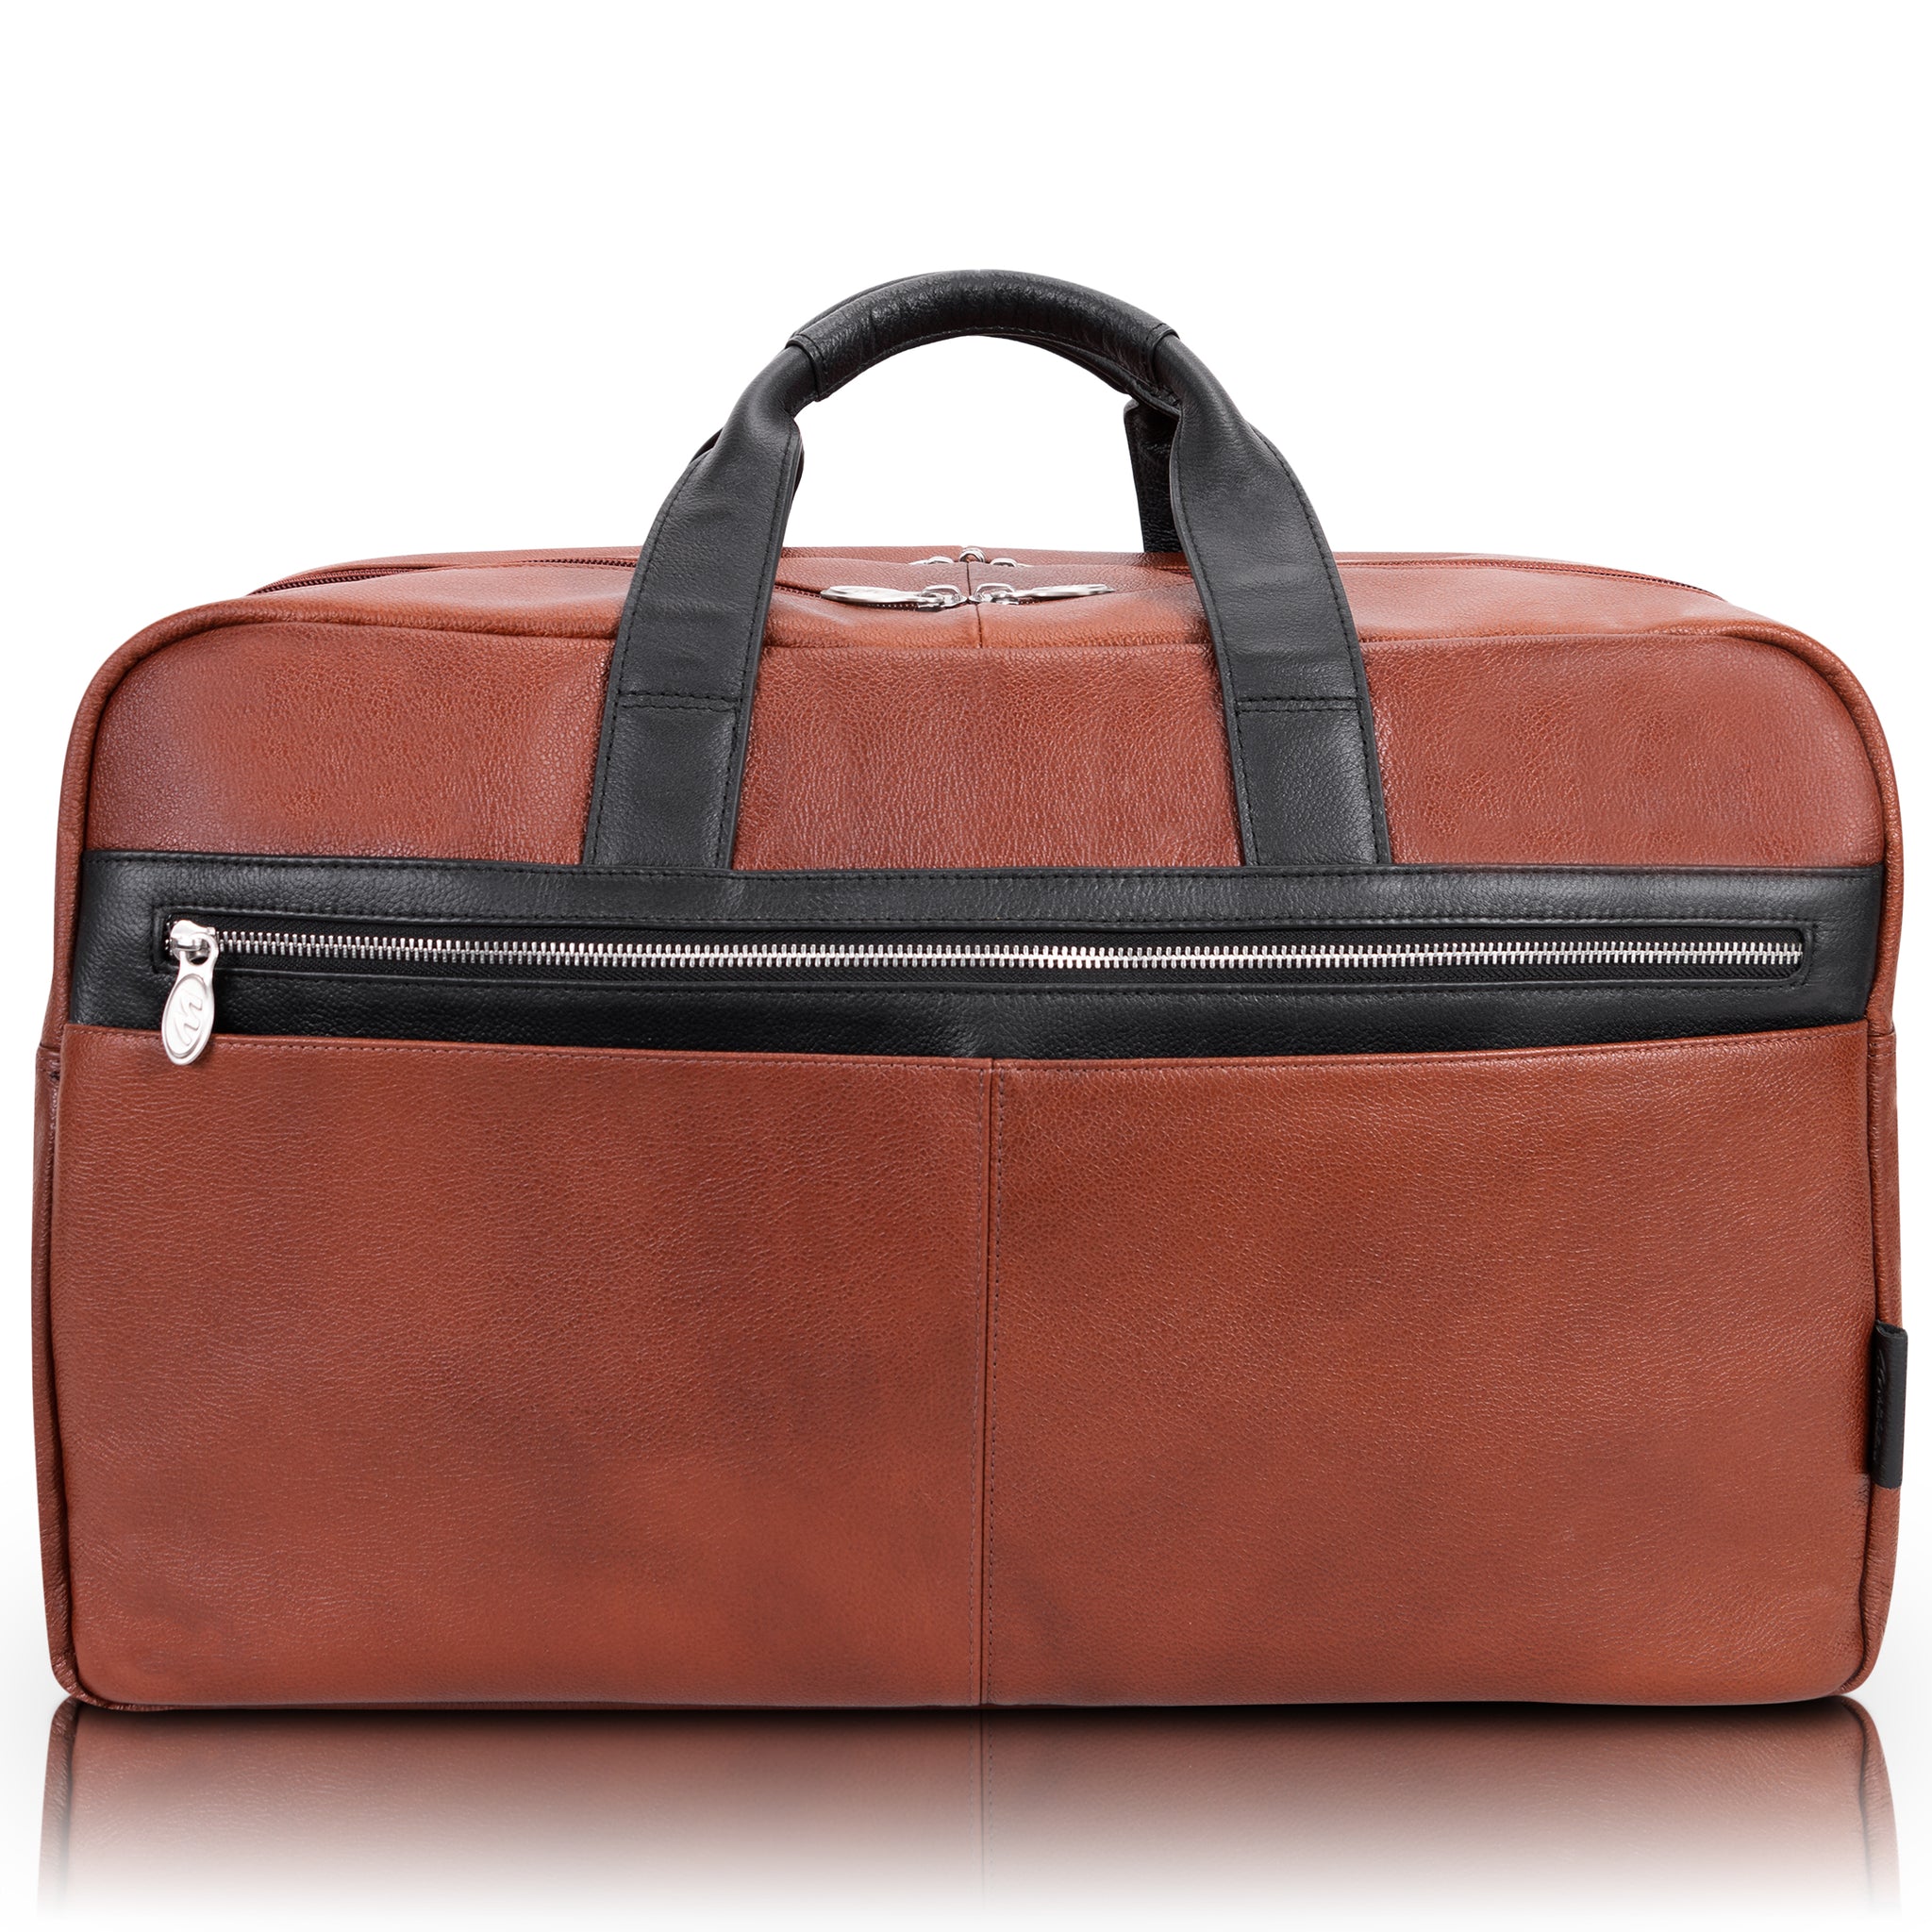 Leather Travel Duffel Bag - Airplane Underseat Carry on Bags, Brown, Size